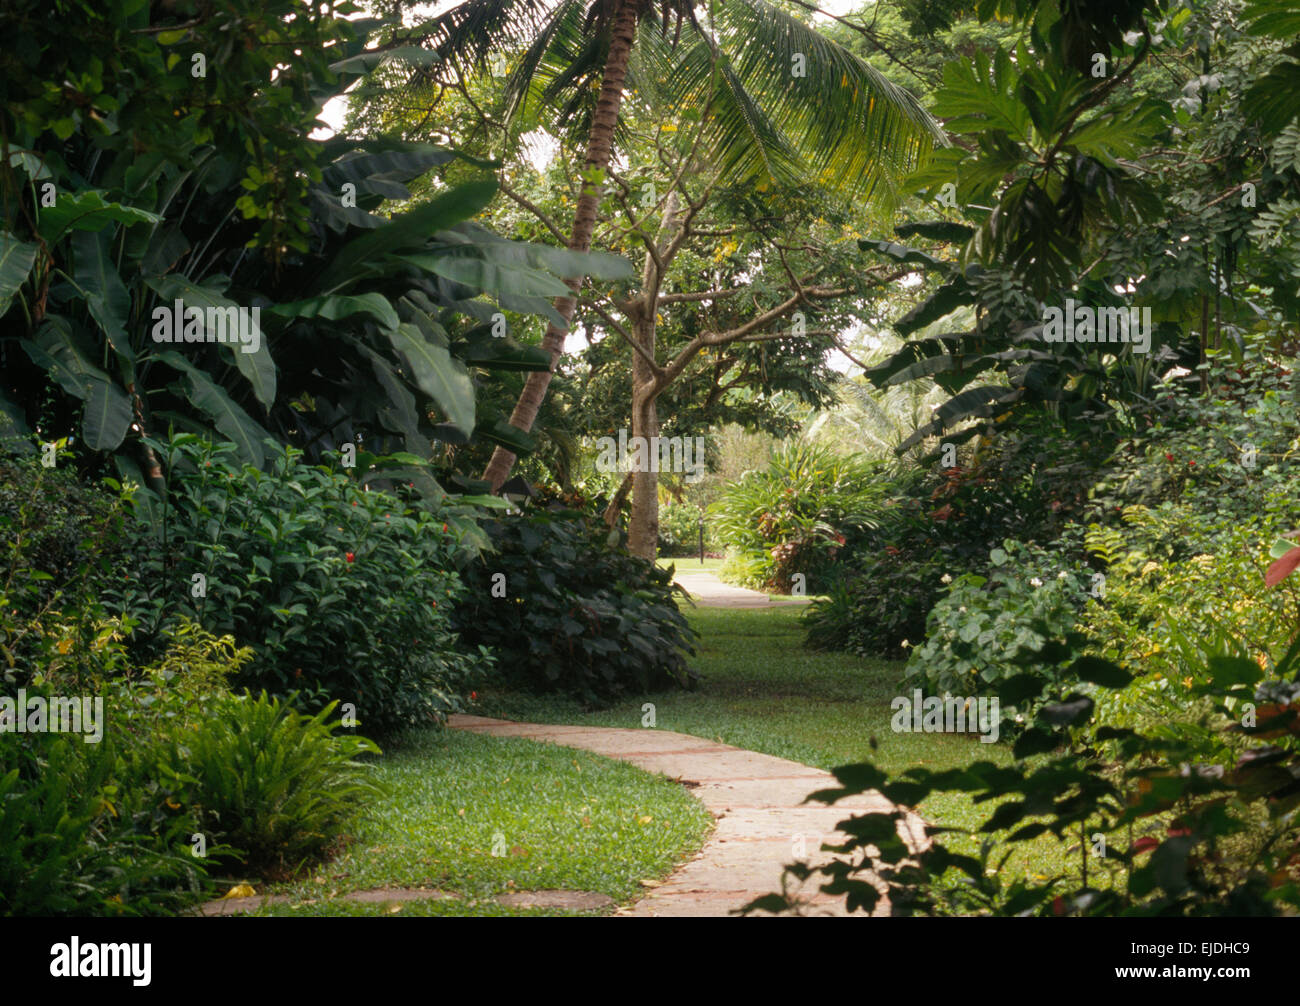 Banana palm and palm trees in lush green borders of tropical coastal garden with curved paved path Stock Photo